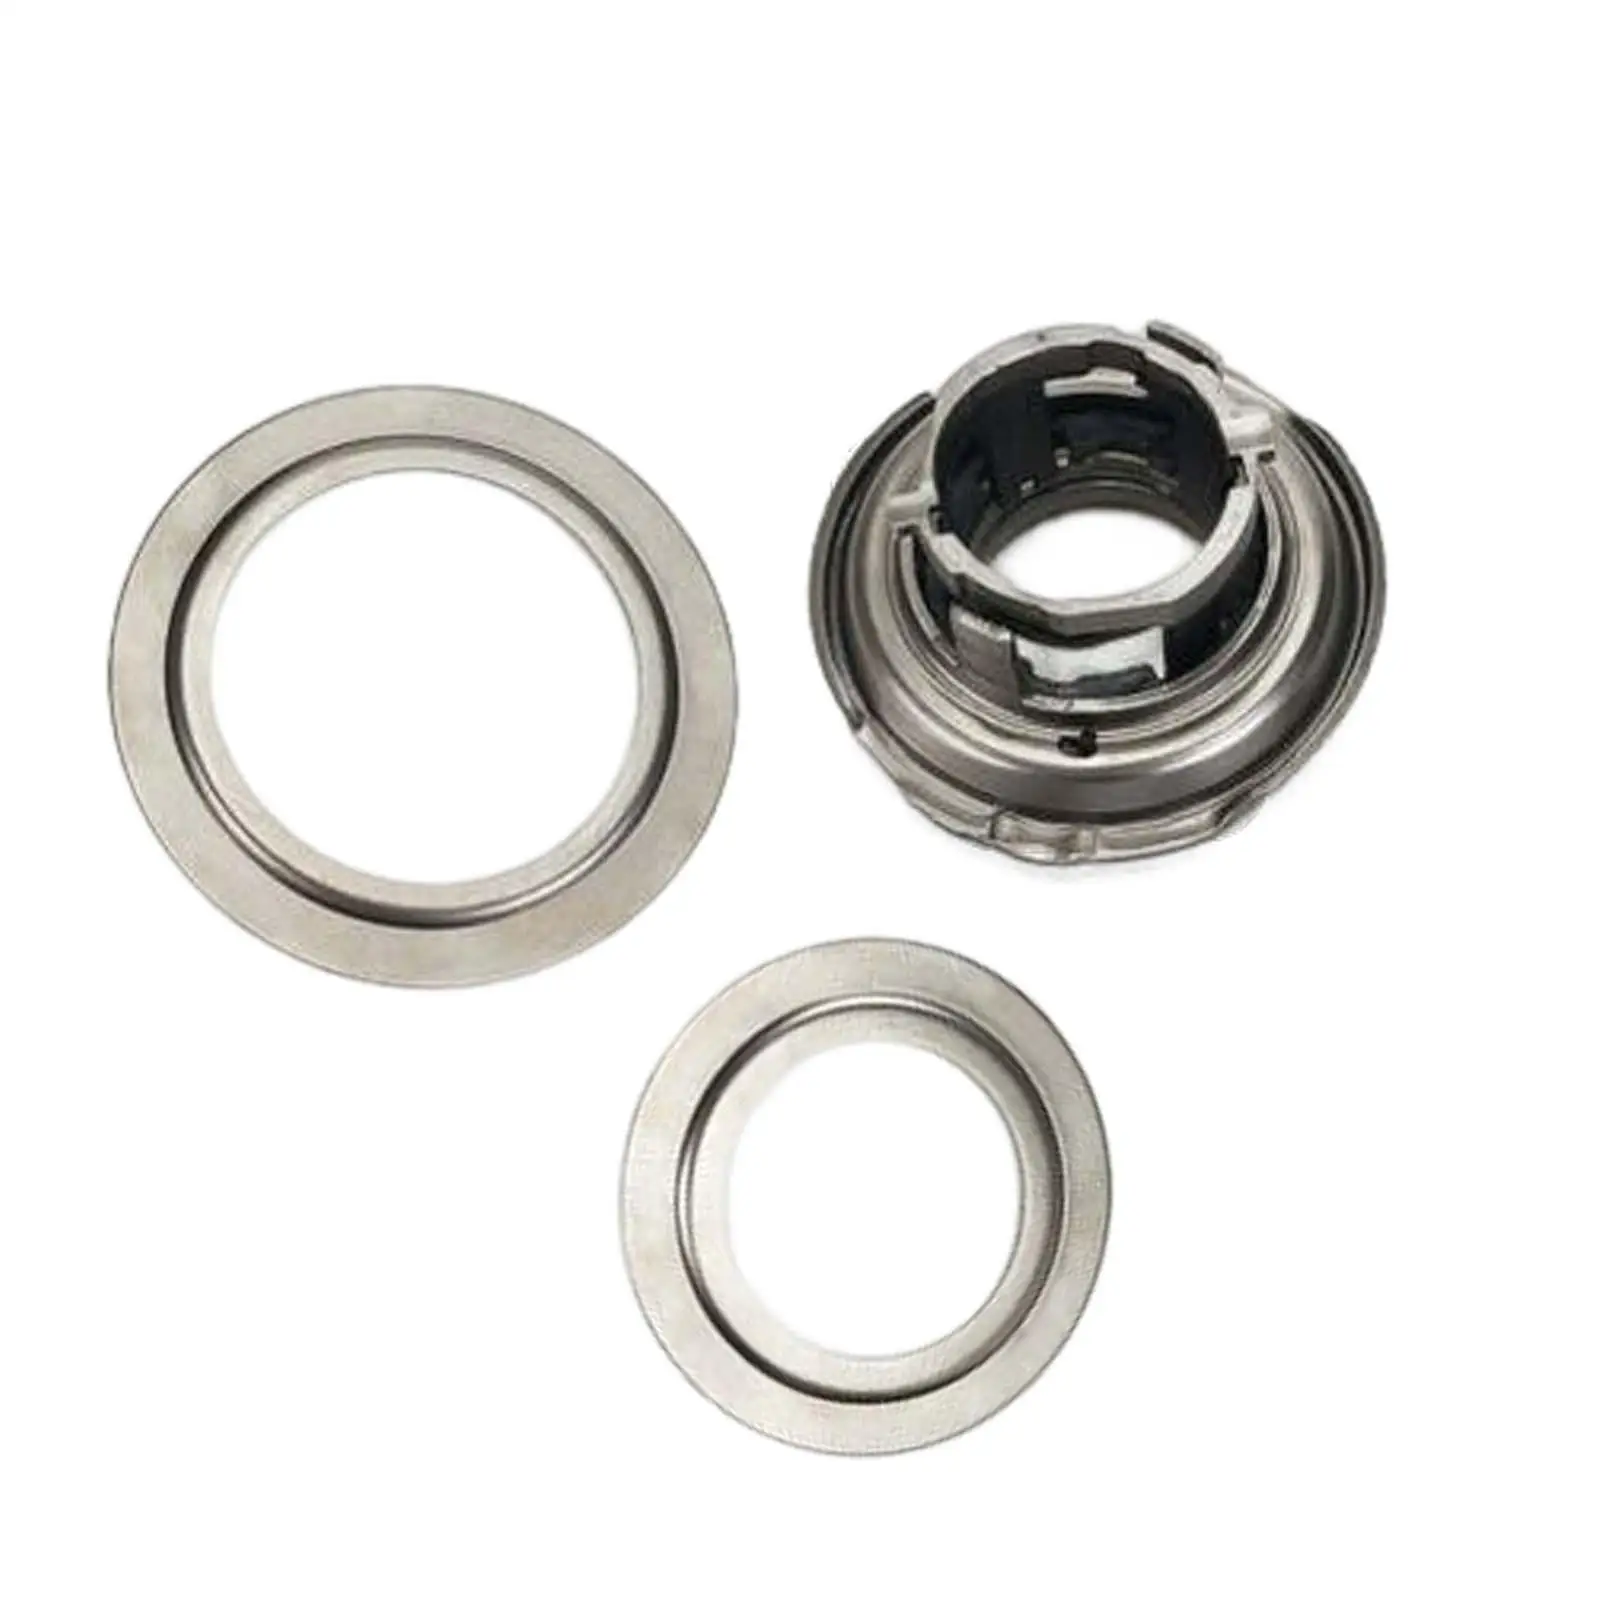 Transmission Bearing Kit 6Dct250 Dps6 Replacement Fit for   Fiesta